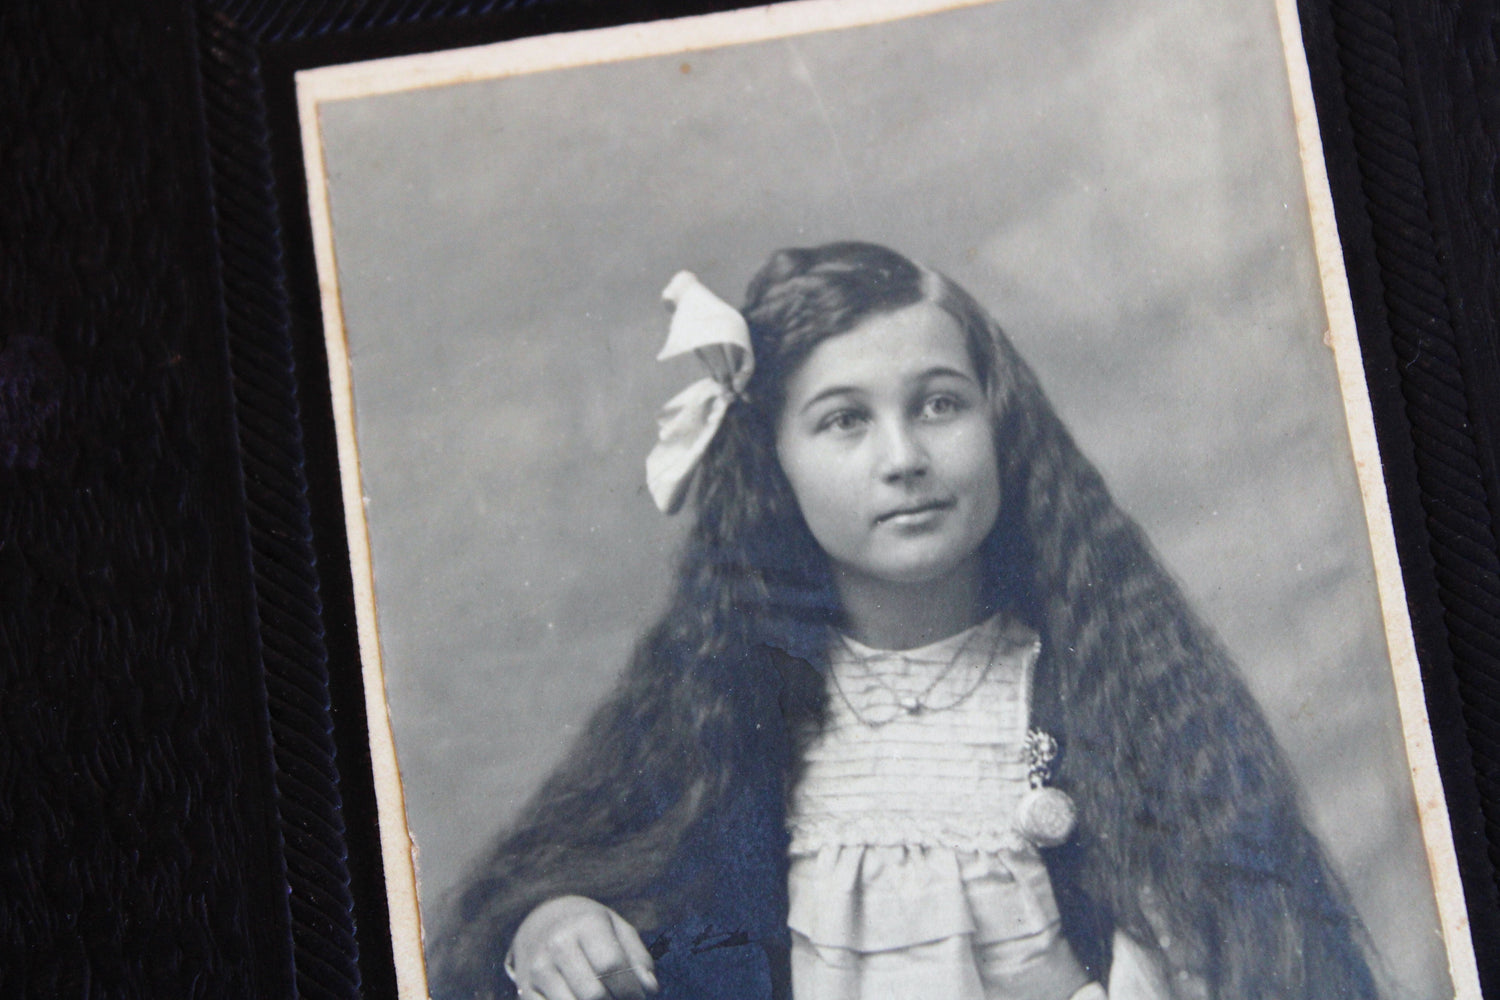 Antique 1910s Photo of a Young Girl